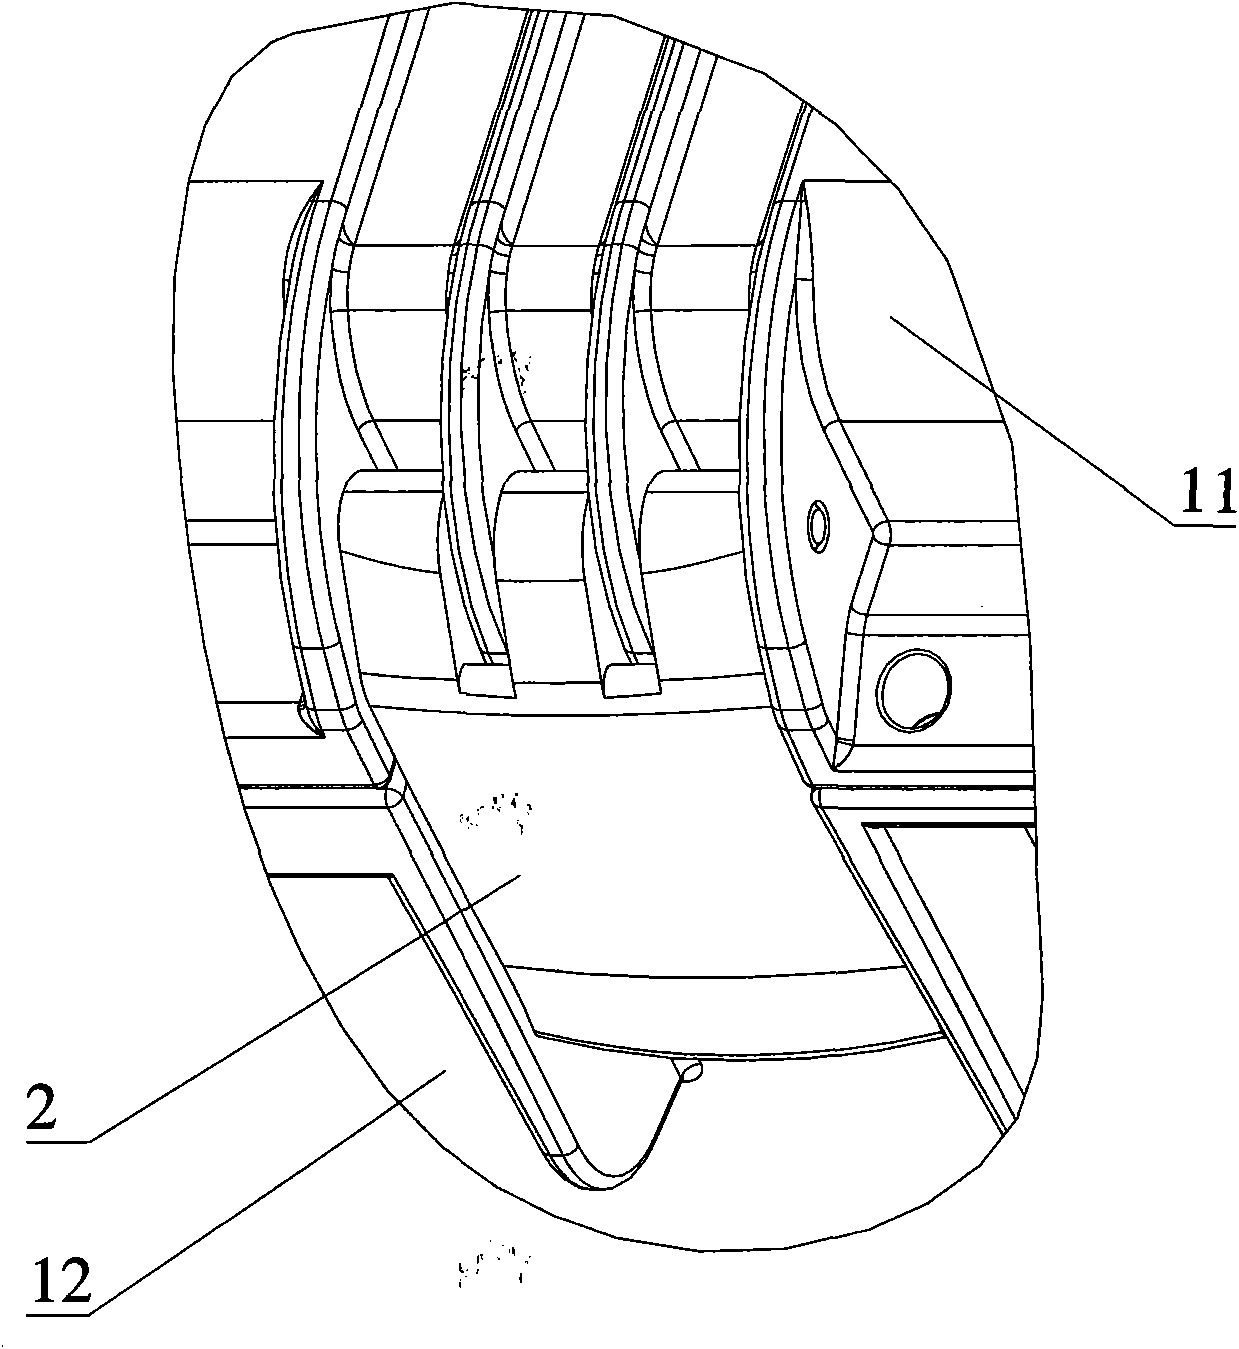 Locking device used for box body